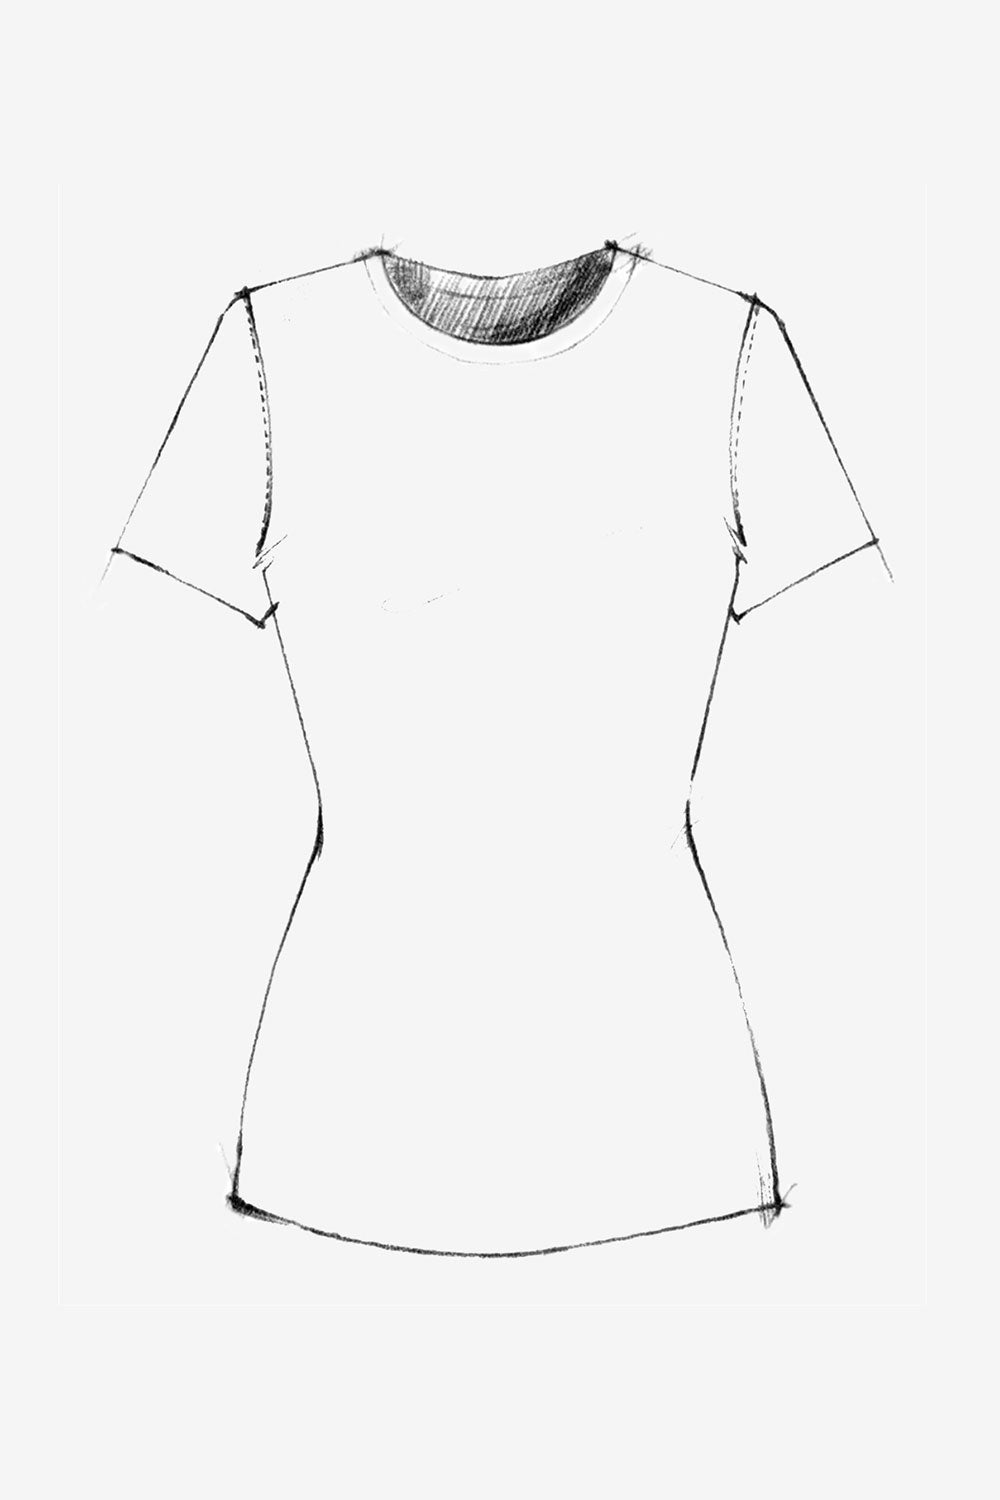 The School of Making The T-Shirt Top Pattern Women's DIY Clothing Pattern for Hand-Sewn T-Shirt Top